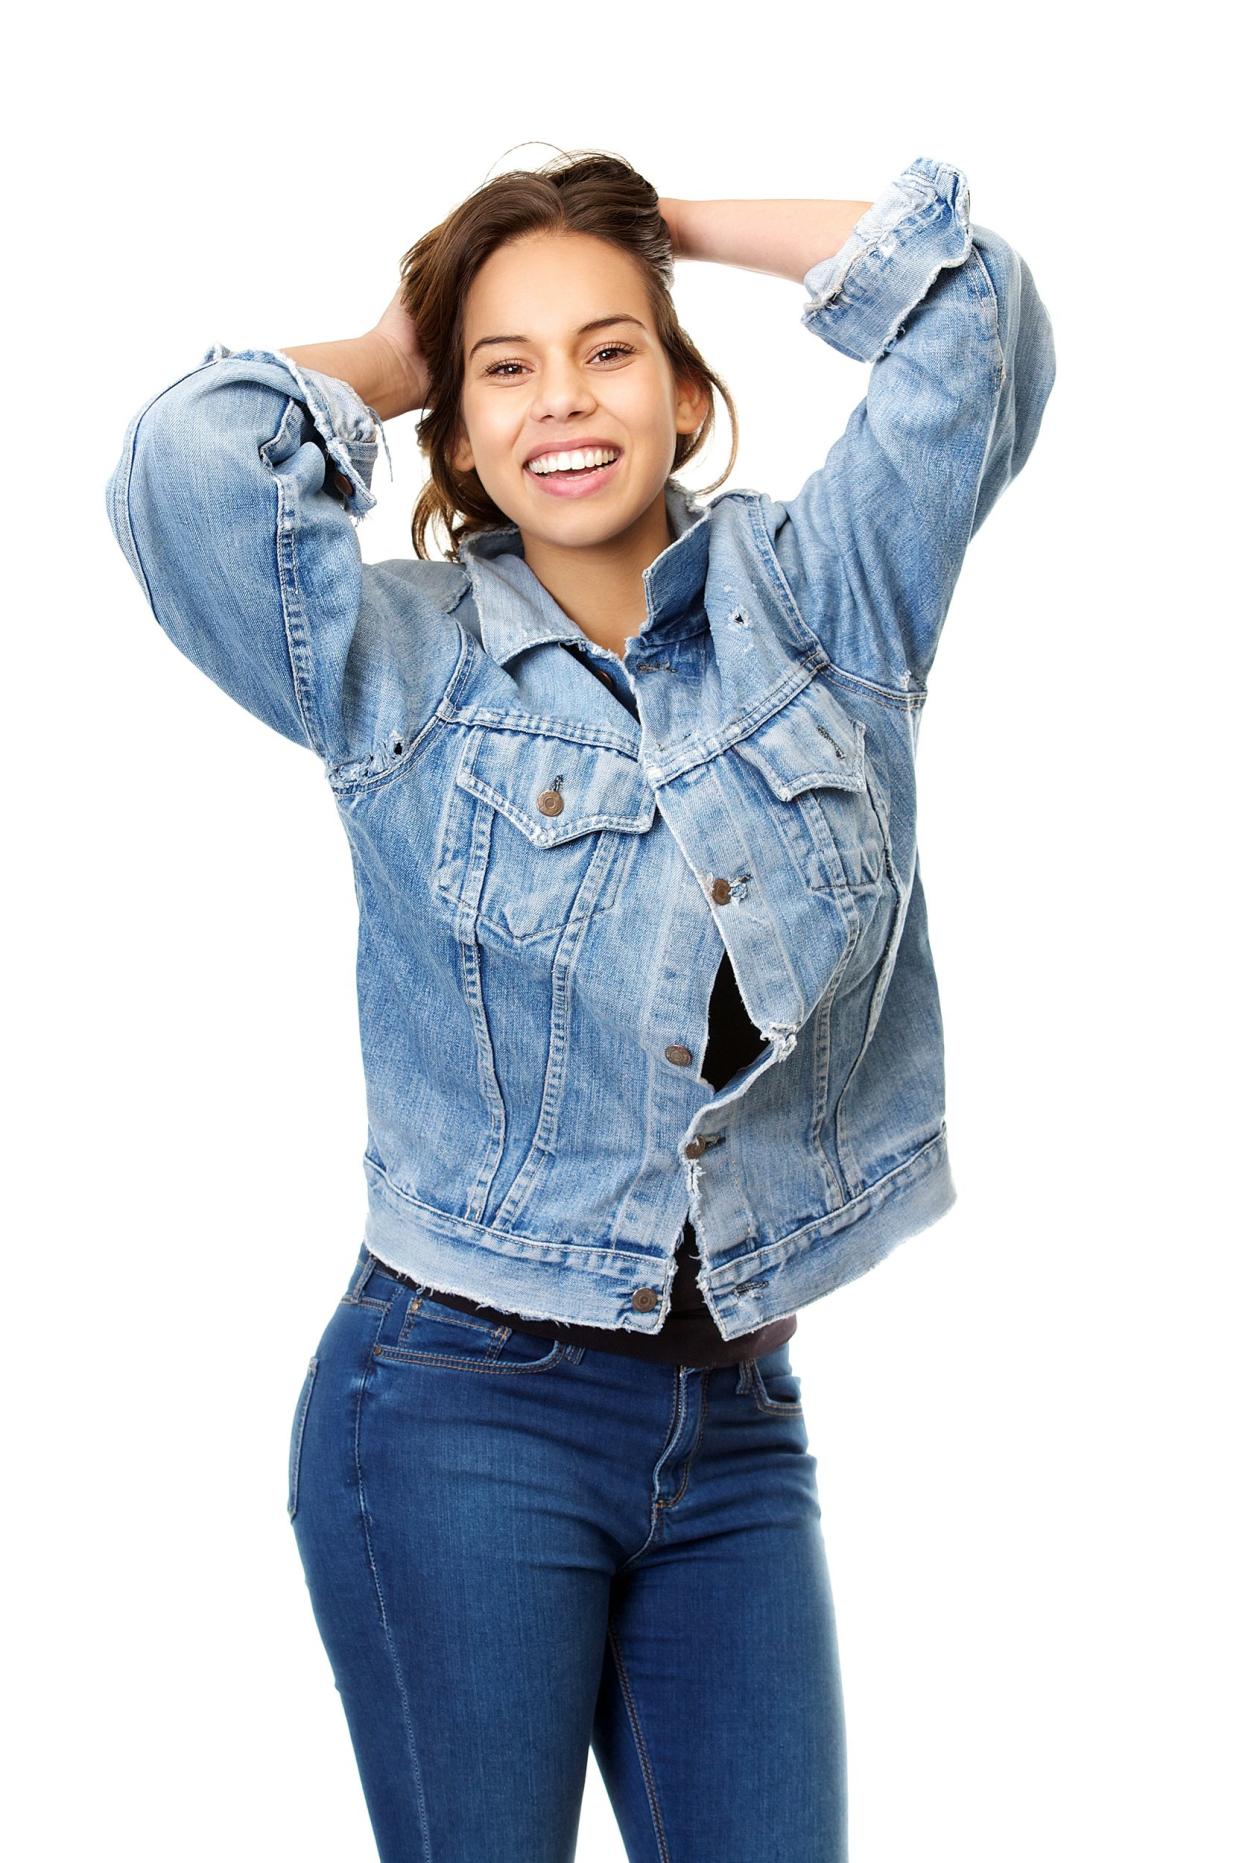 Woman wearing jeans and a denim jacket